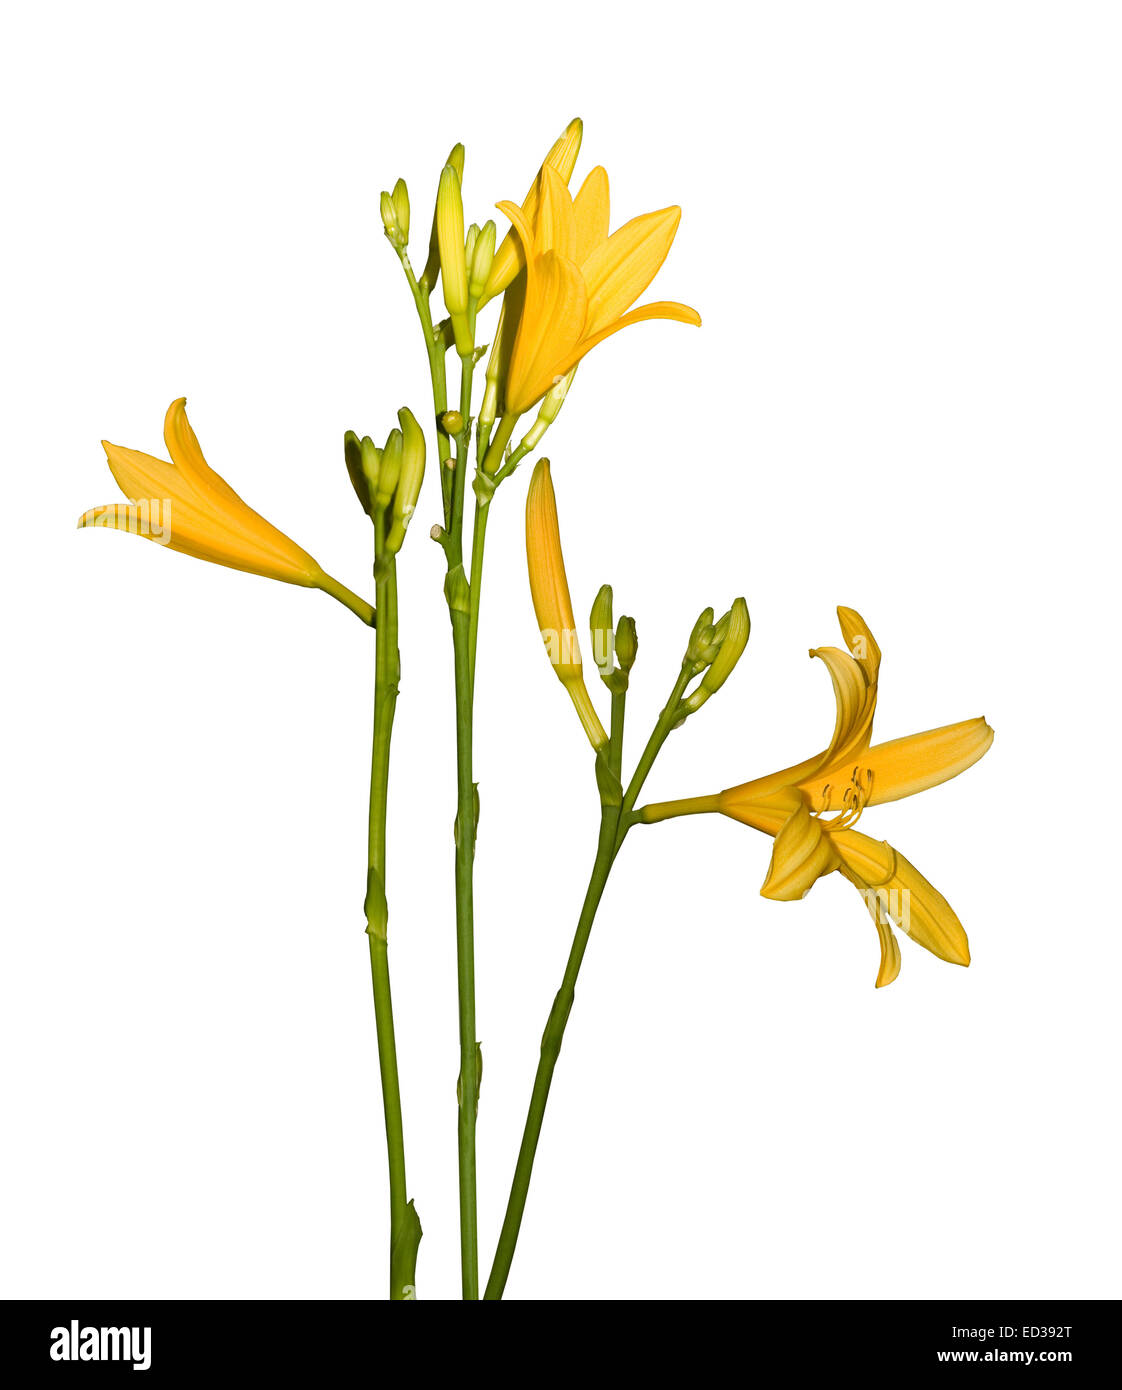 Group of deep yellow diploid daylily flowers, with tall stems, buds & dark green leaves against white background Stock Photo